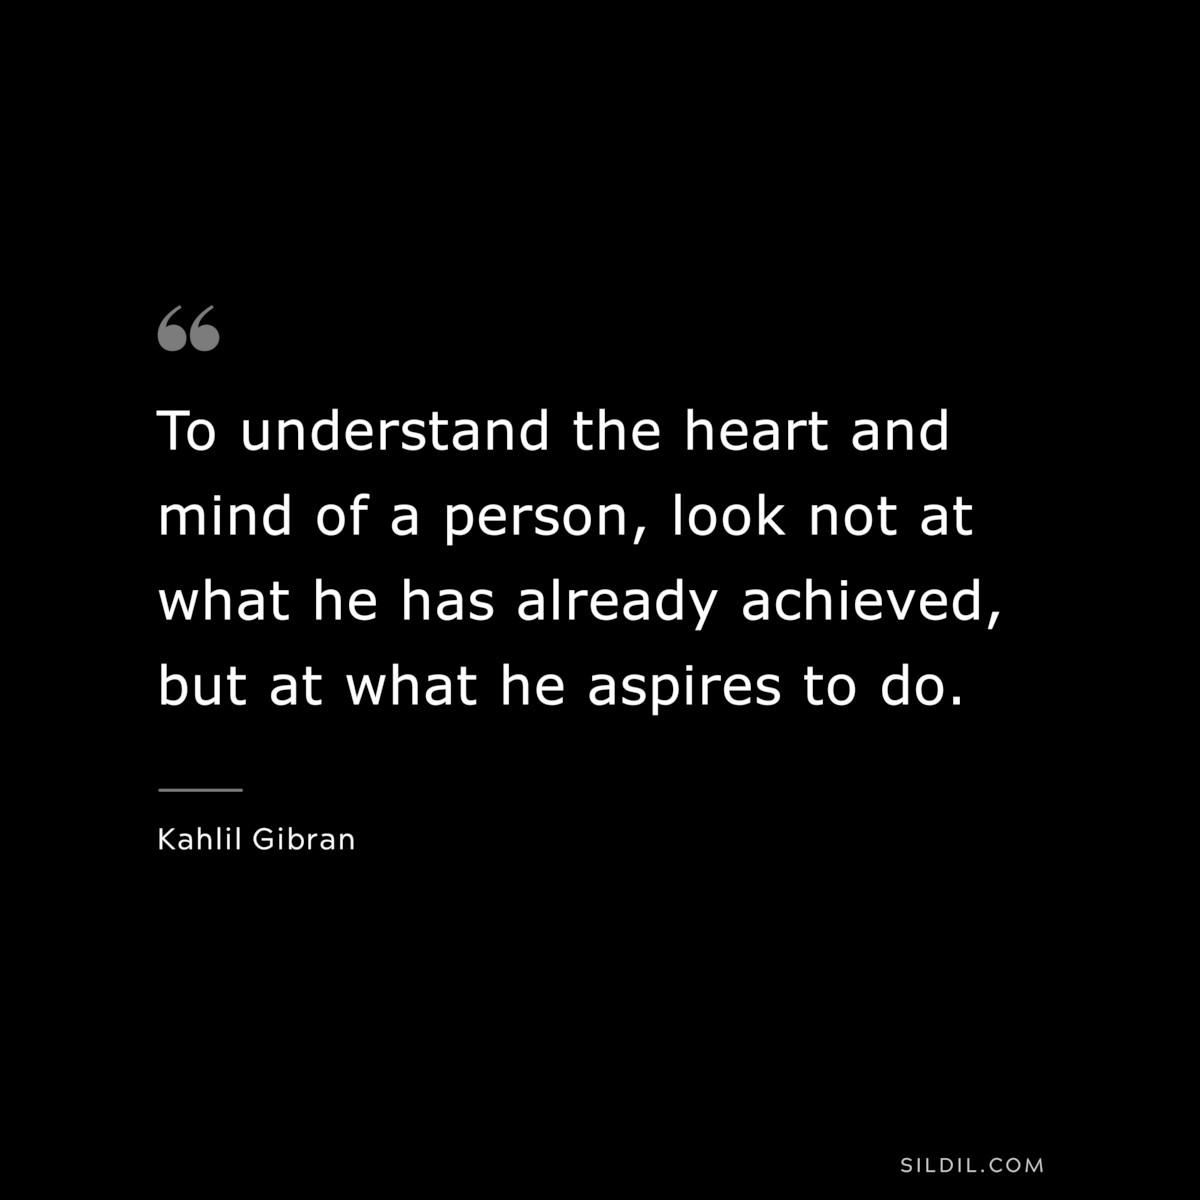 To understand the heart and mind of a person, look not at what he has already achieved, but at what he aspires to do. ― Kahlil Gibran